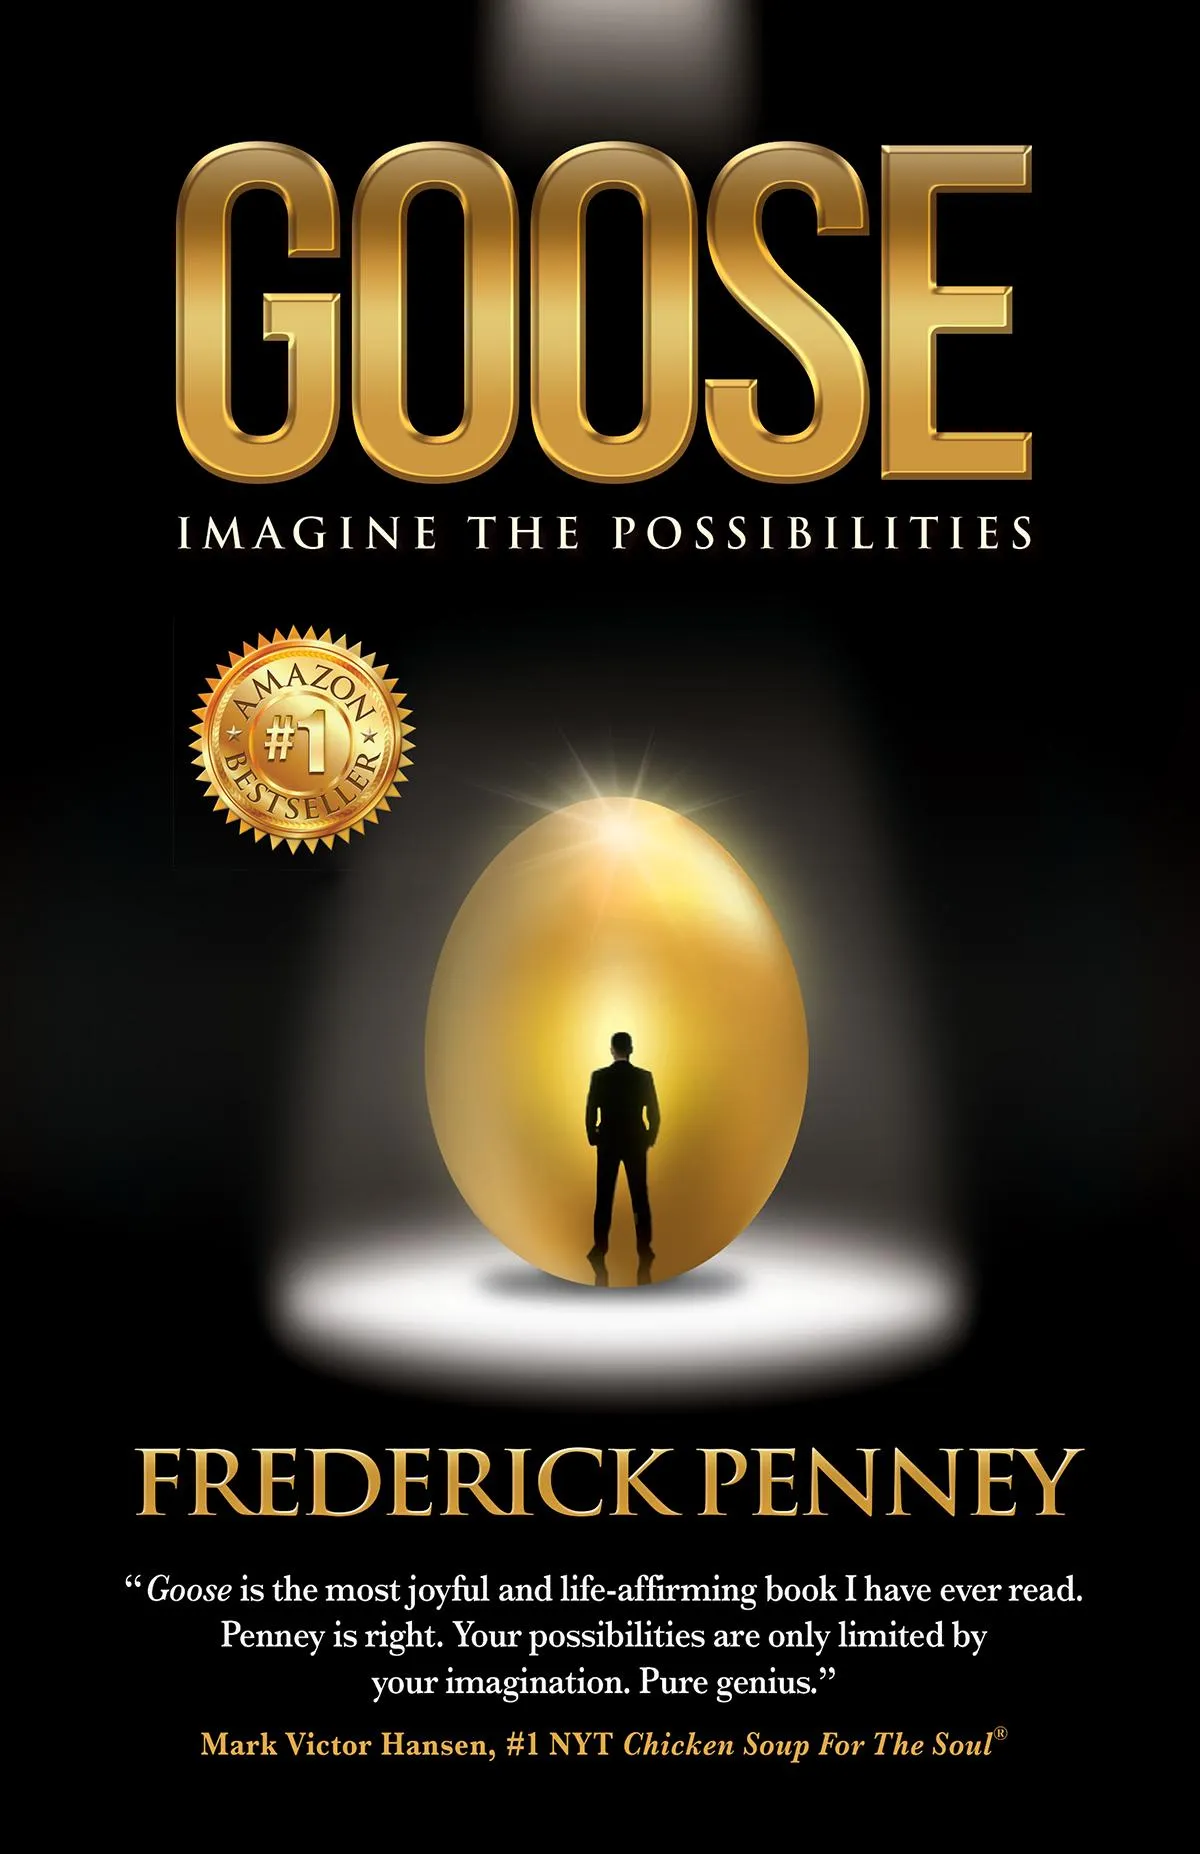 Goose, Imagine the Possibilities by Frederick Penney